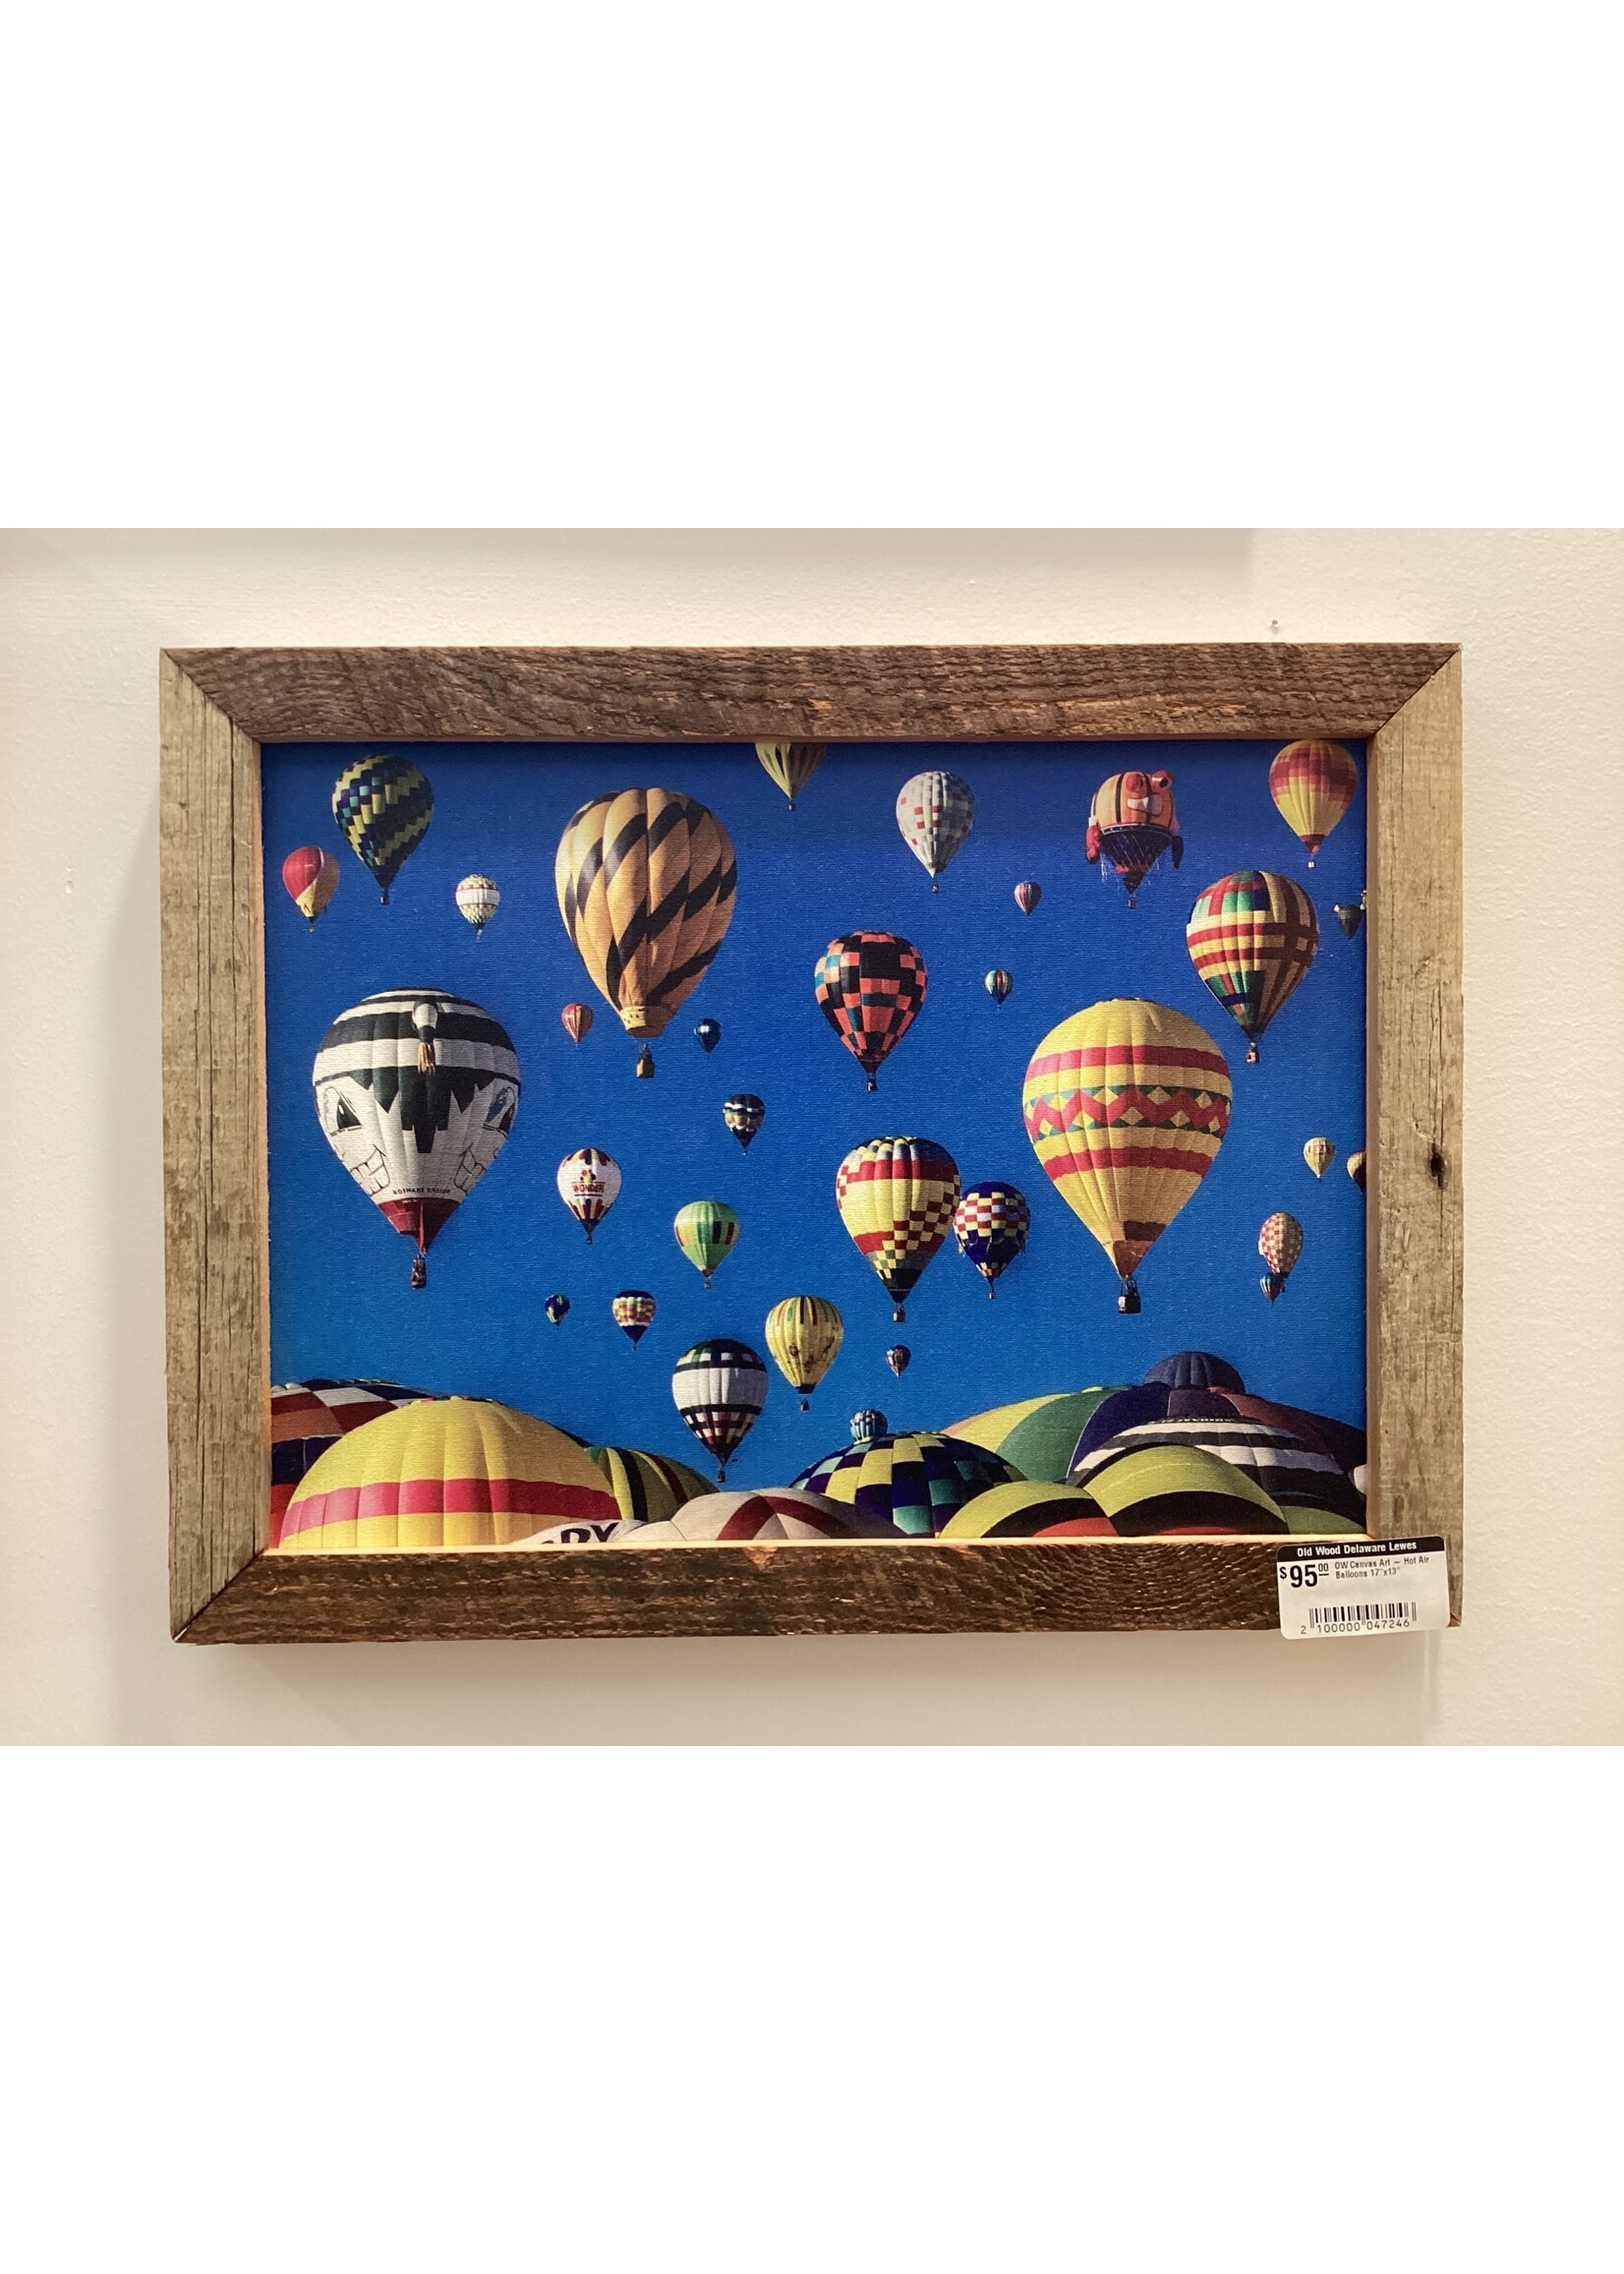 Old Wood Delaware OW Canvas Art - Hot Air Balloons 17"x13"